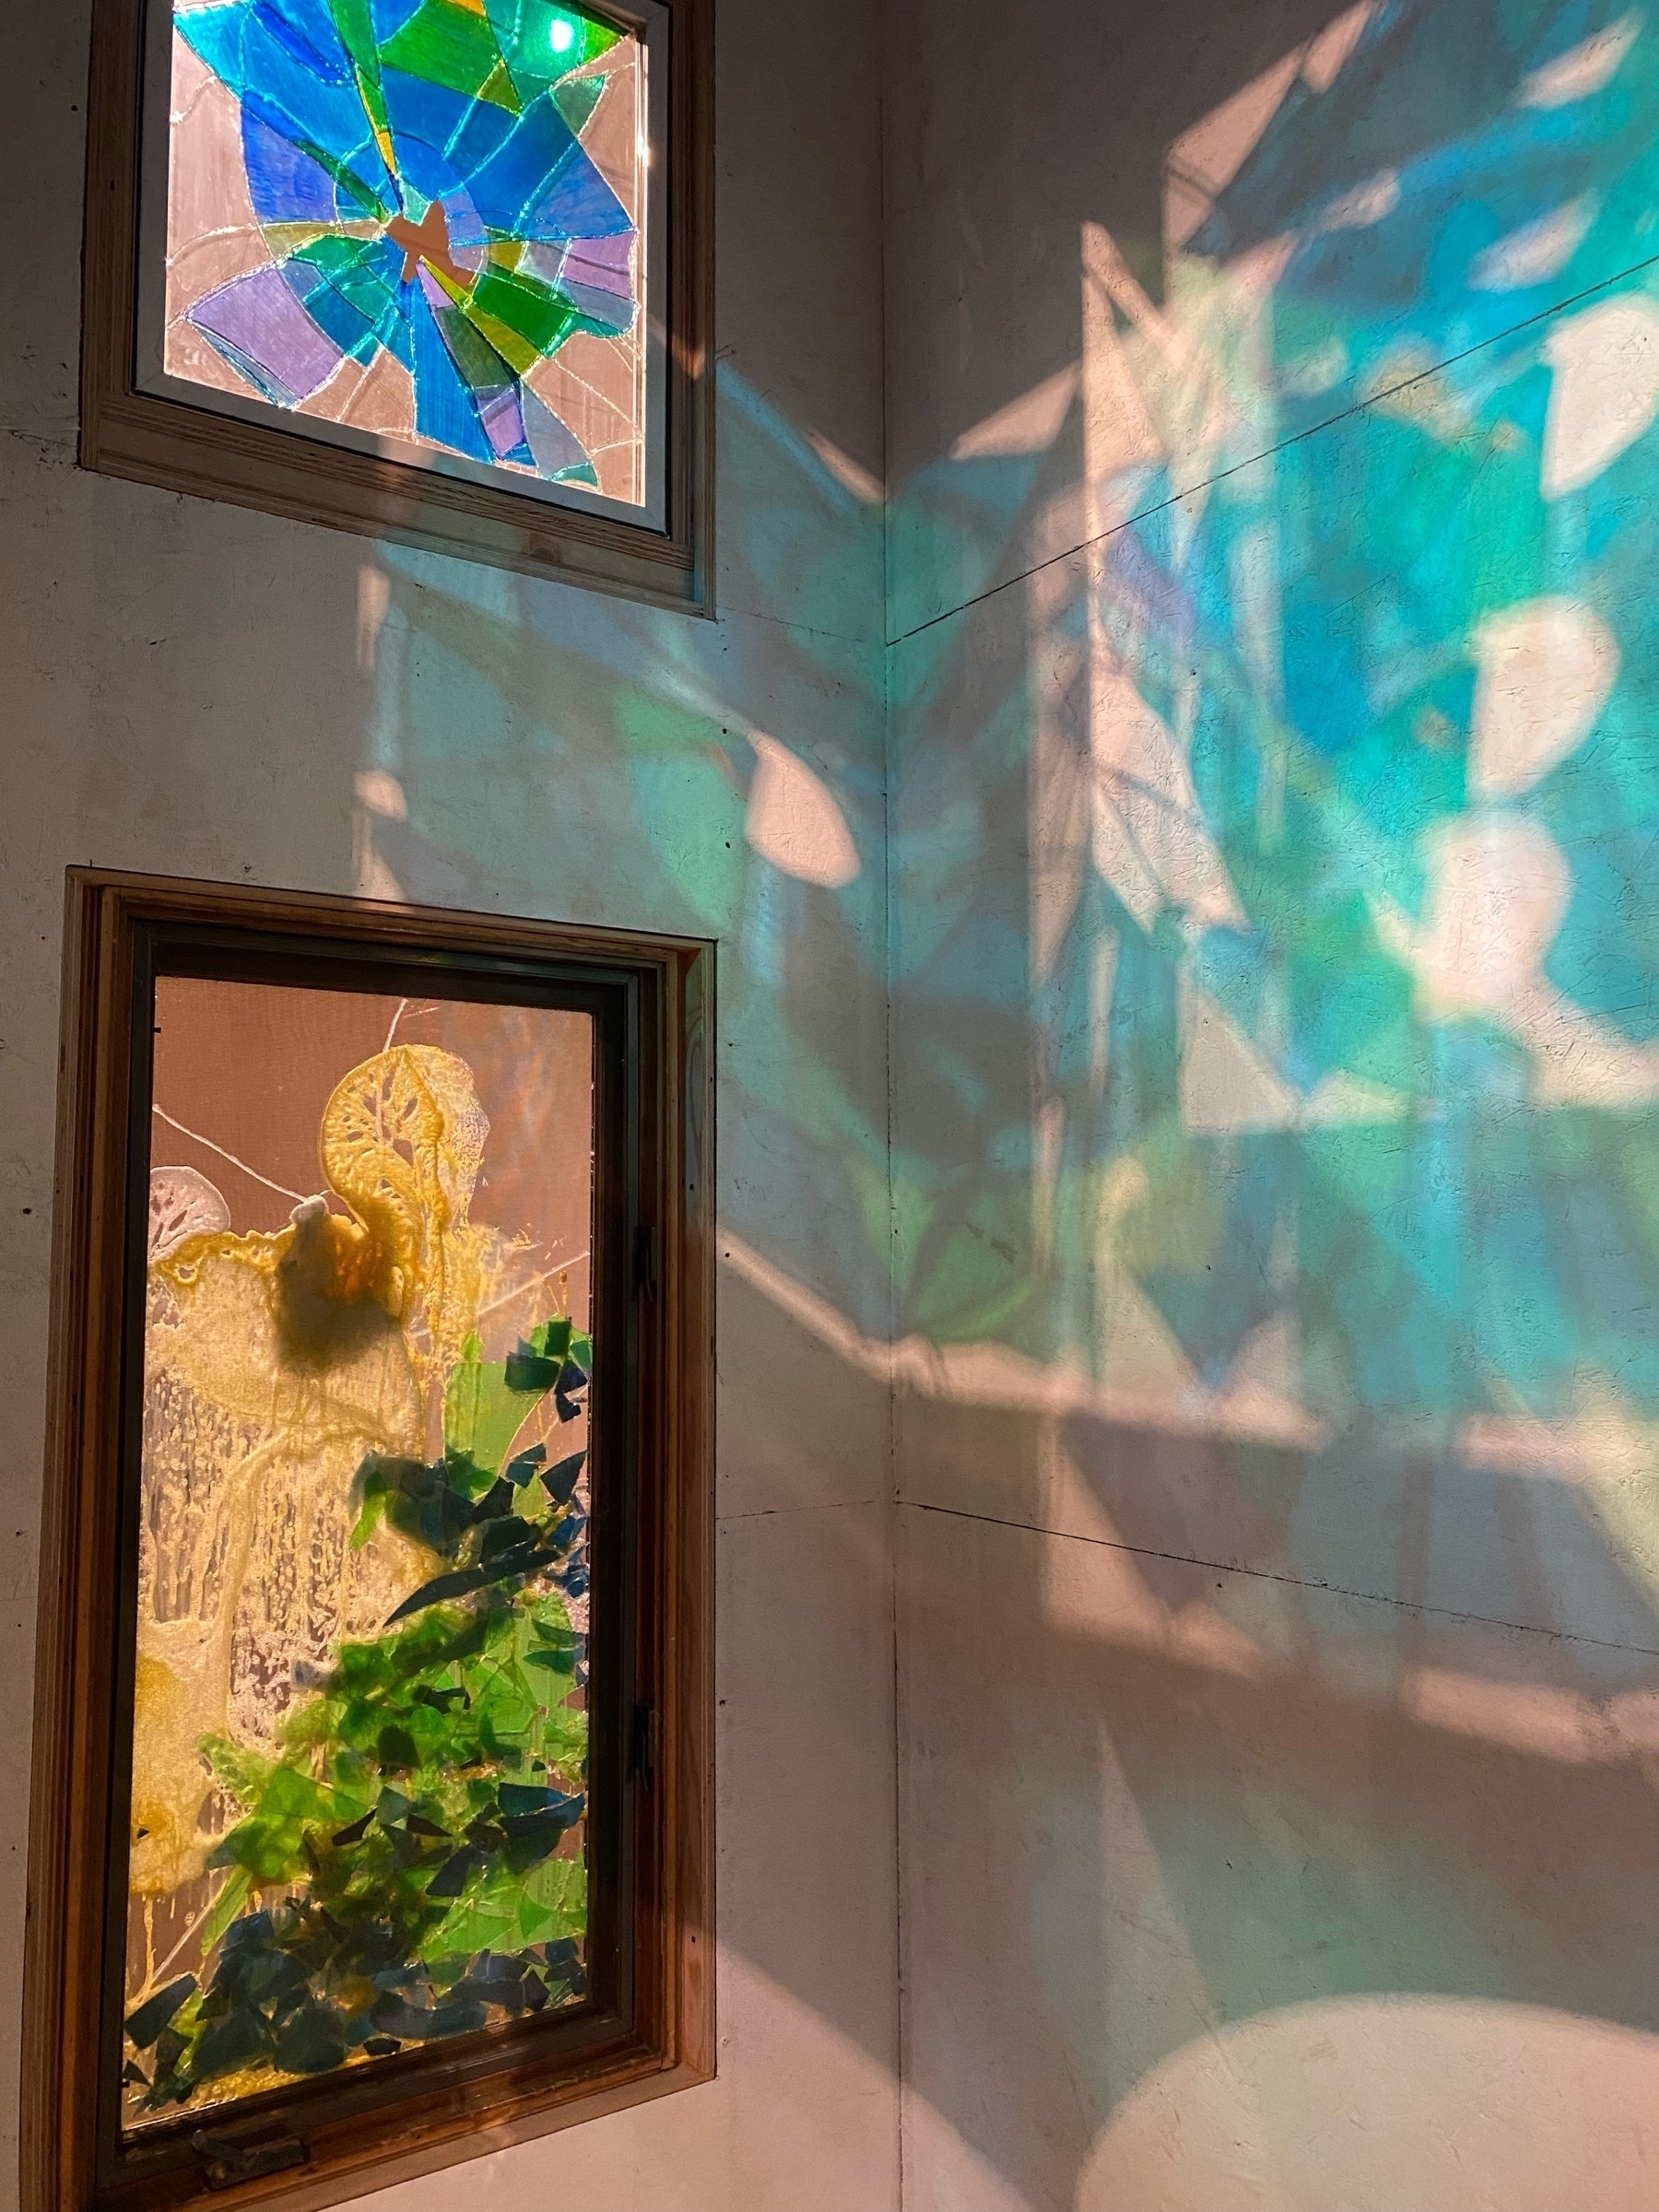 Stained glass windows on the left, with a light shining behind them and casting colored patterns on the right.